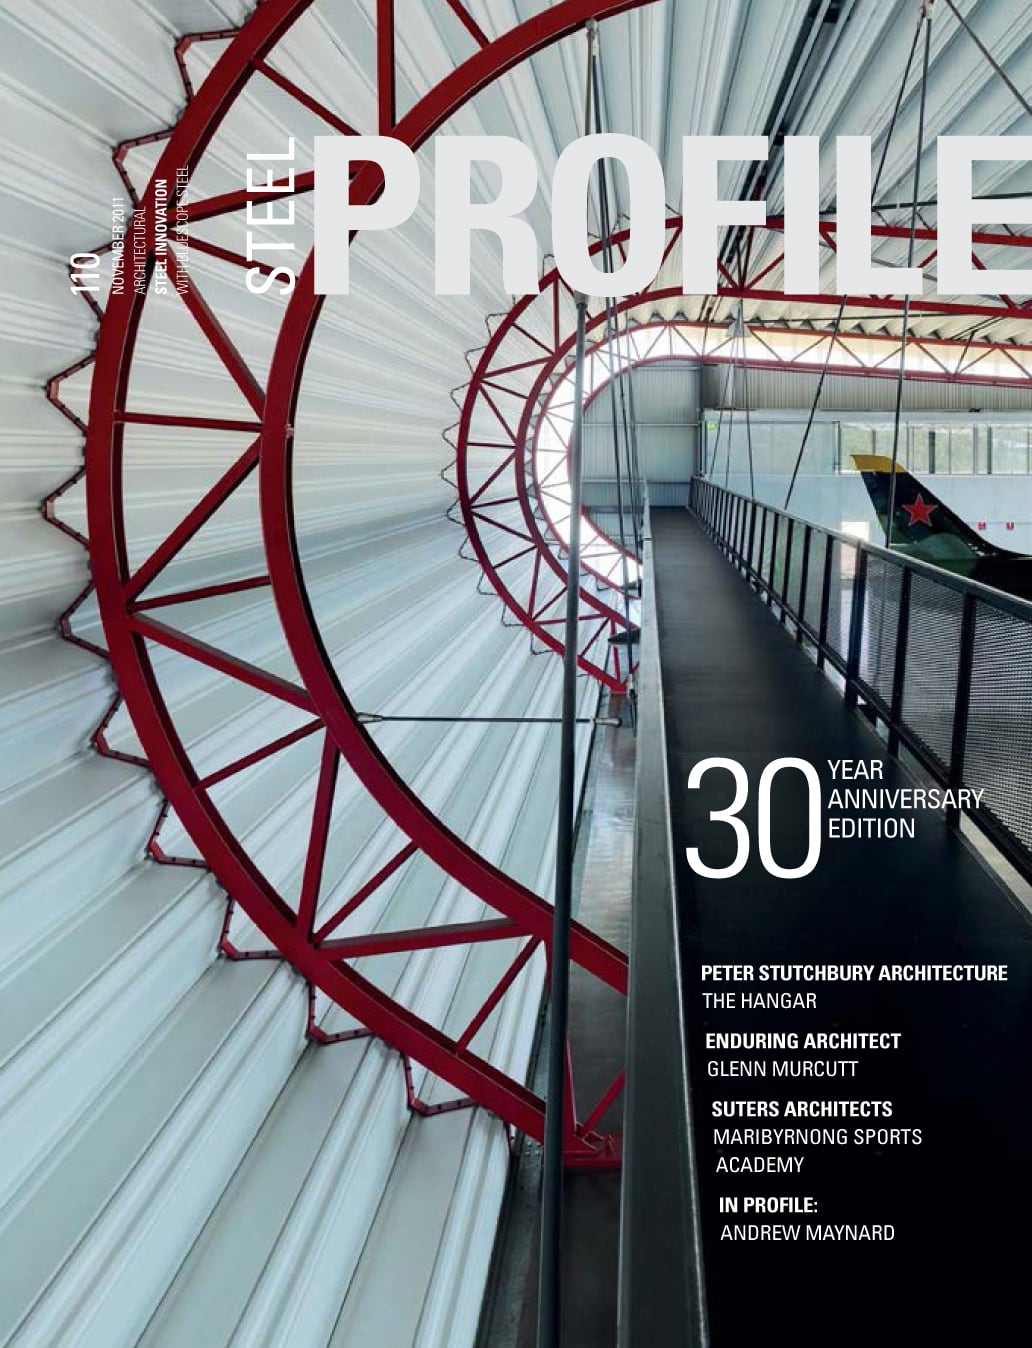 The front cover of Edition 110